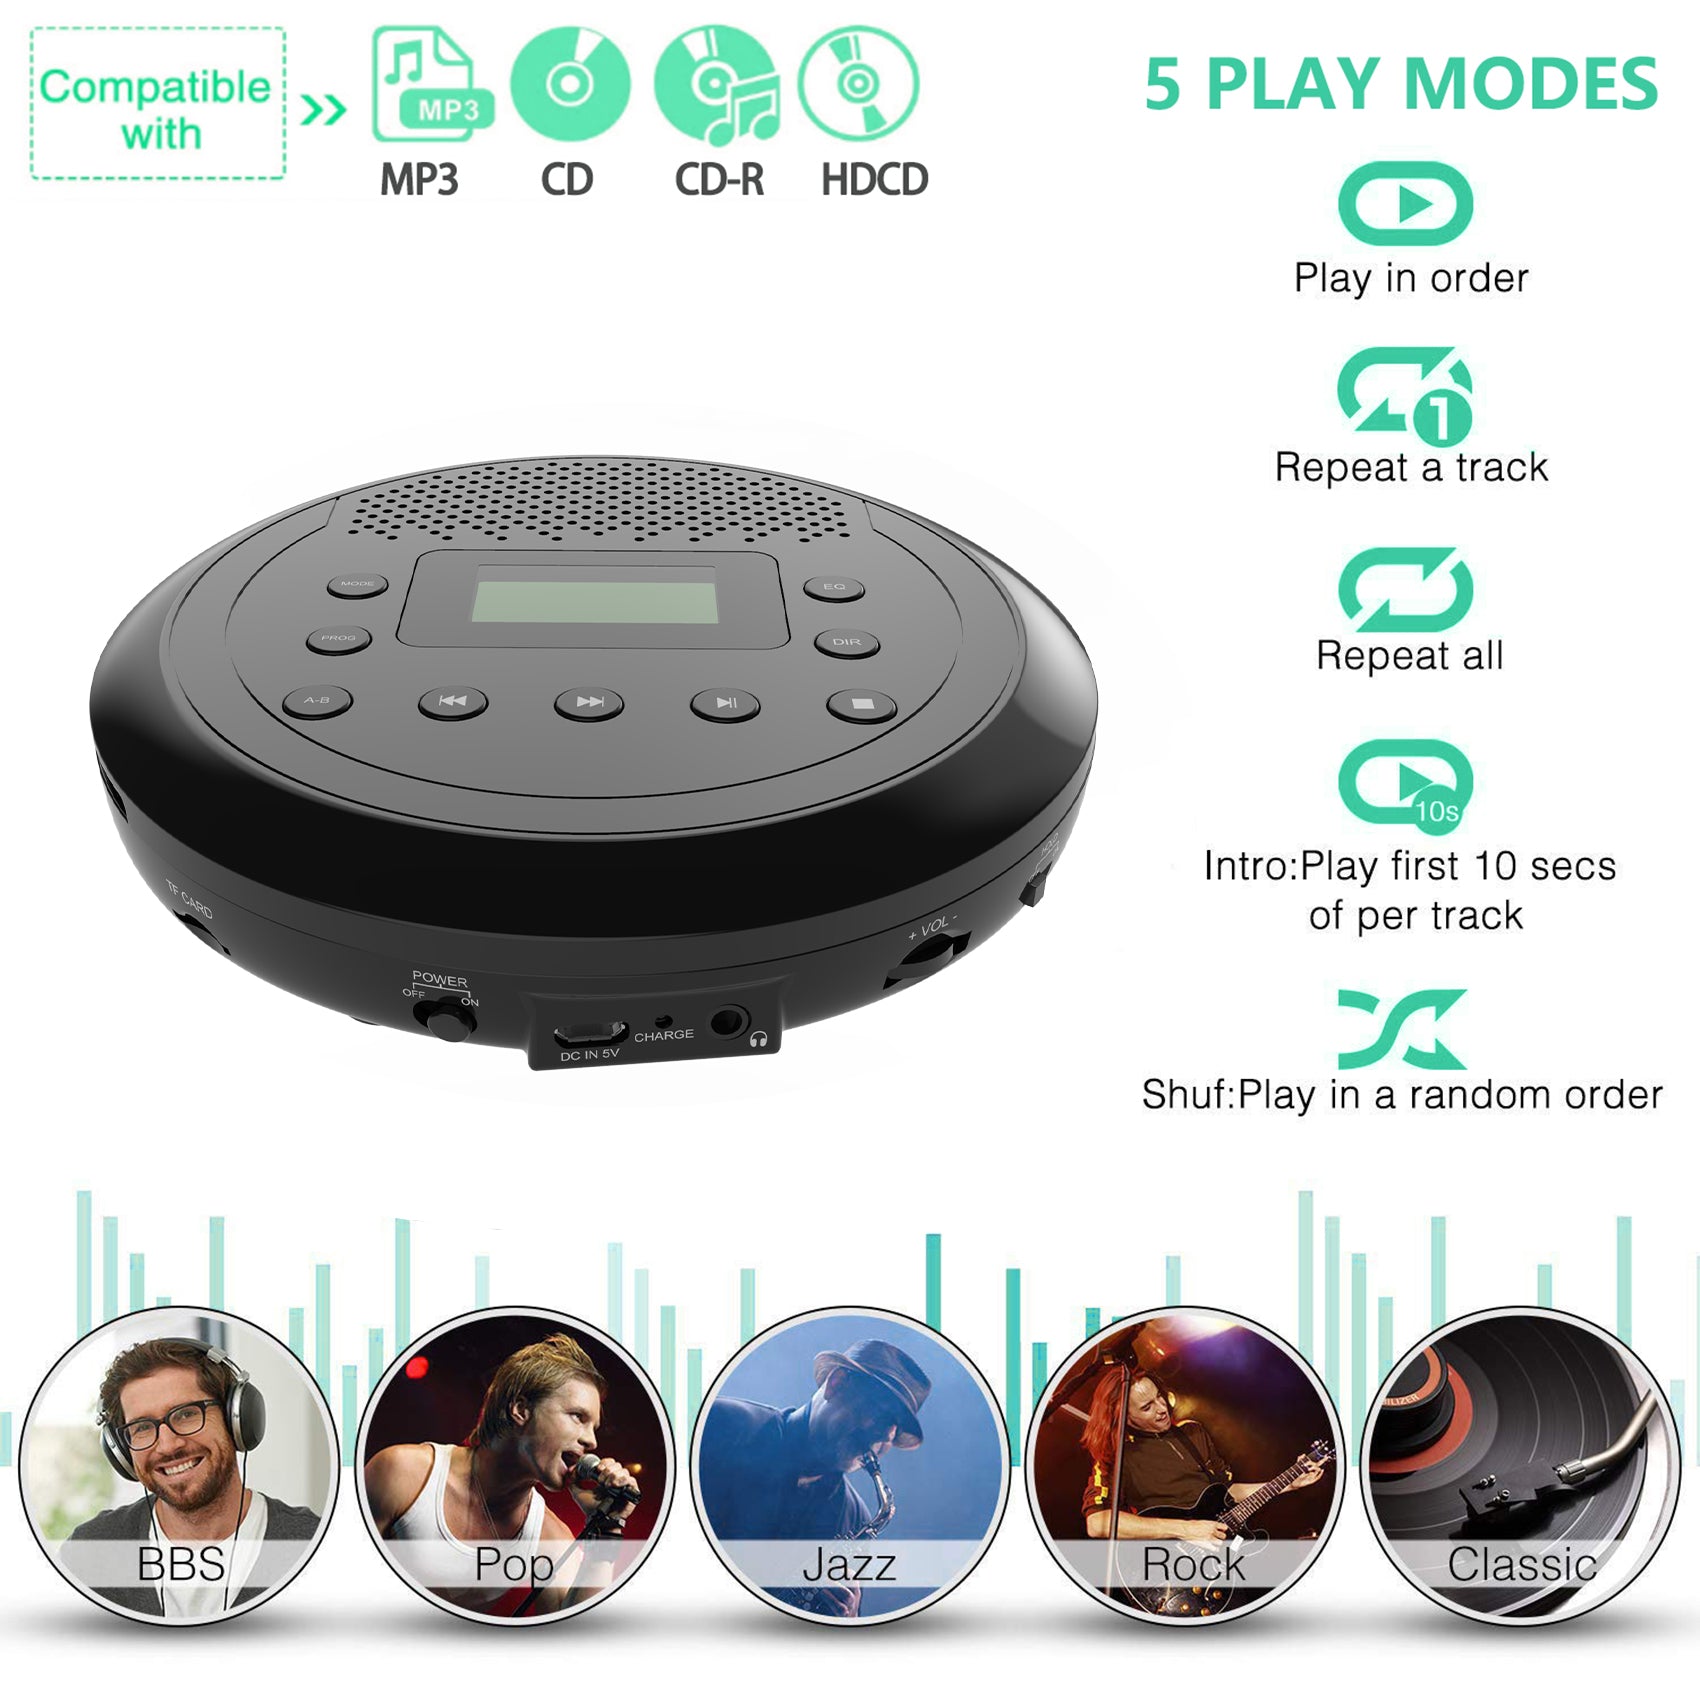 CD Player Portable, MONODEAL MD-109 Rechargeable Portable CD Player with Built-in Speakers for Car and Personal Use, Anti-Skip CD Player with Headphones